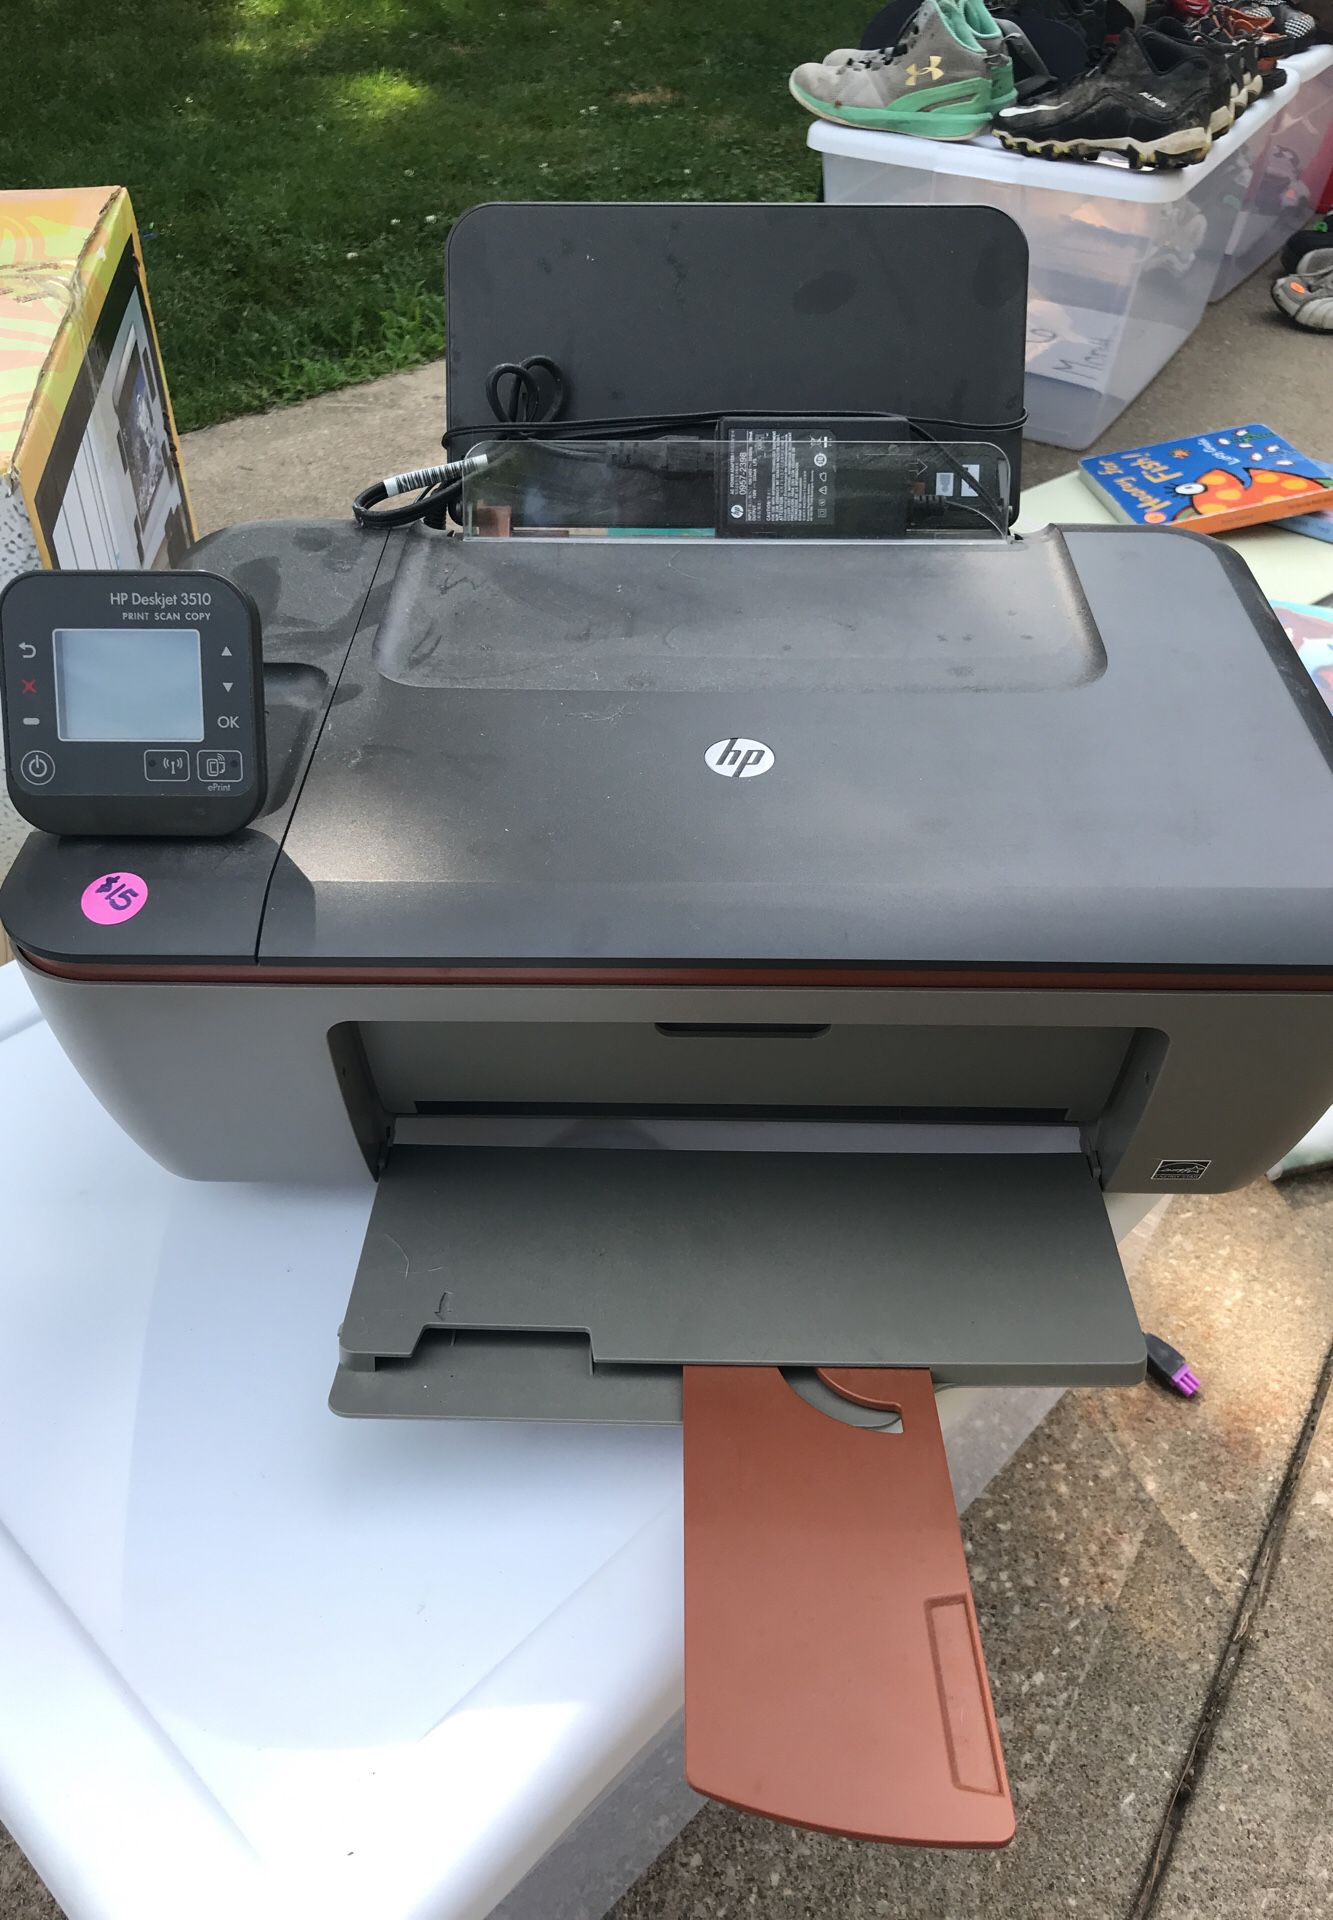 how to scan from printer to computer on hp deskjet 3510